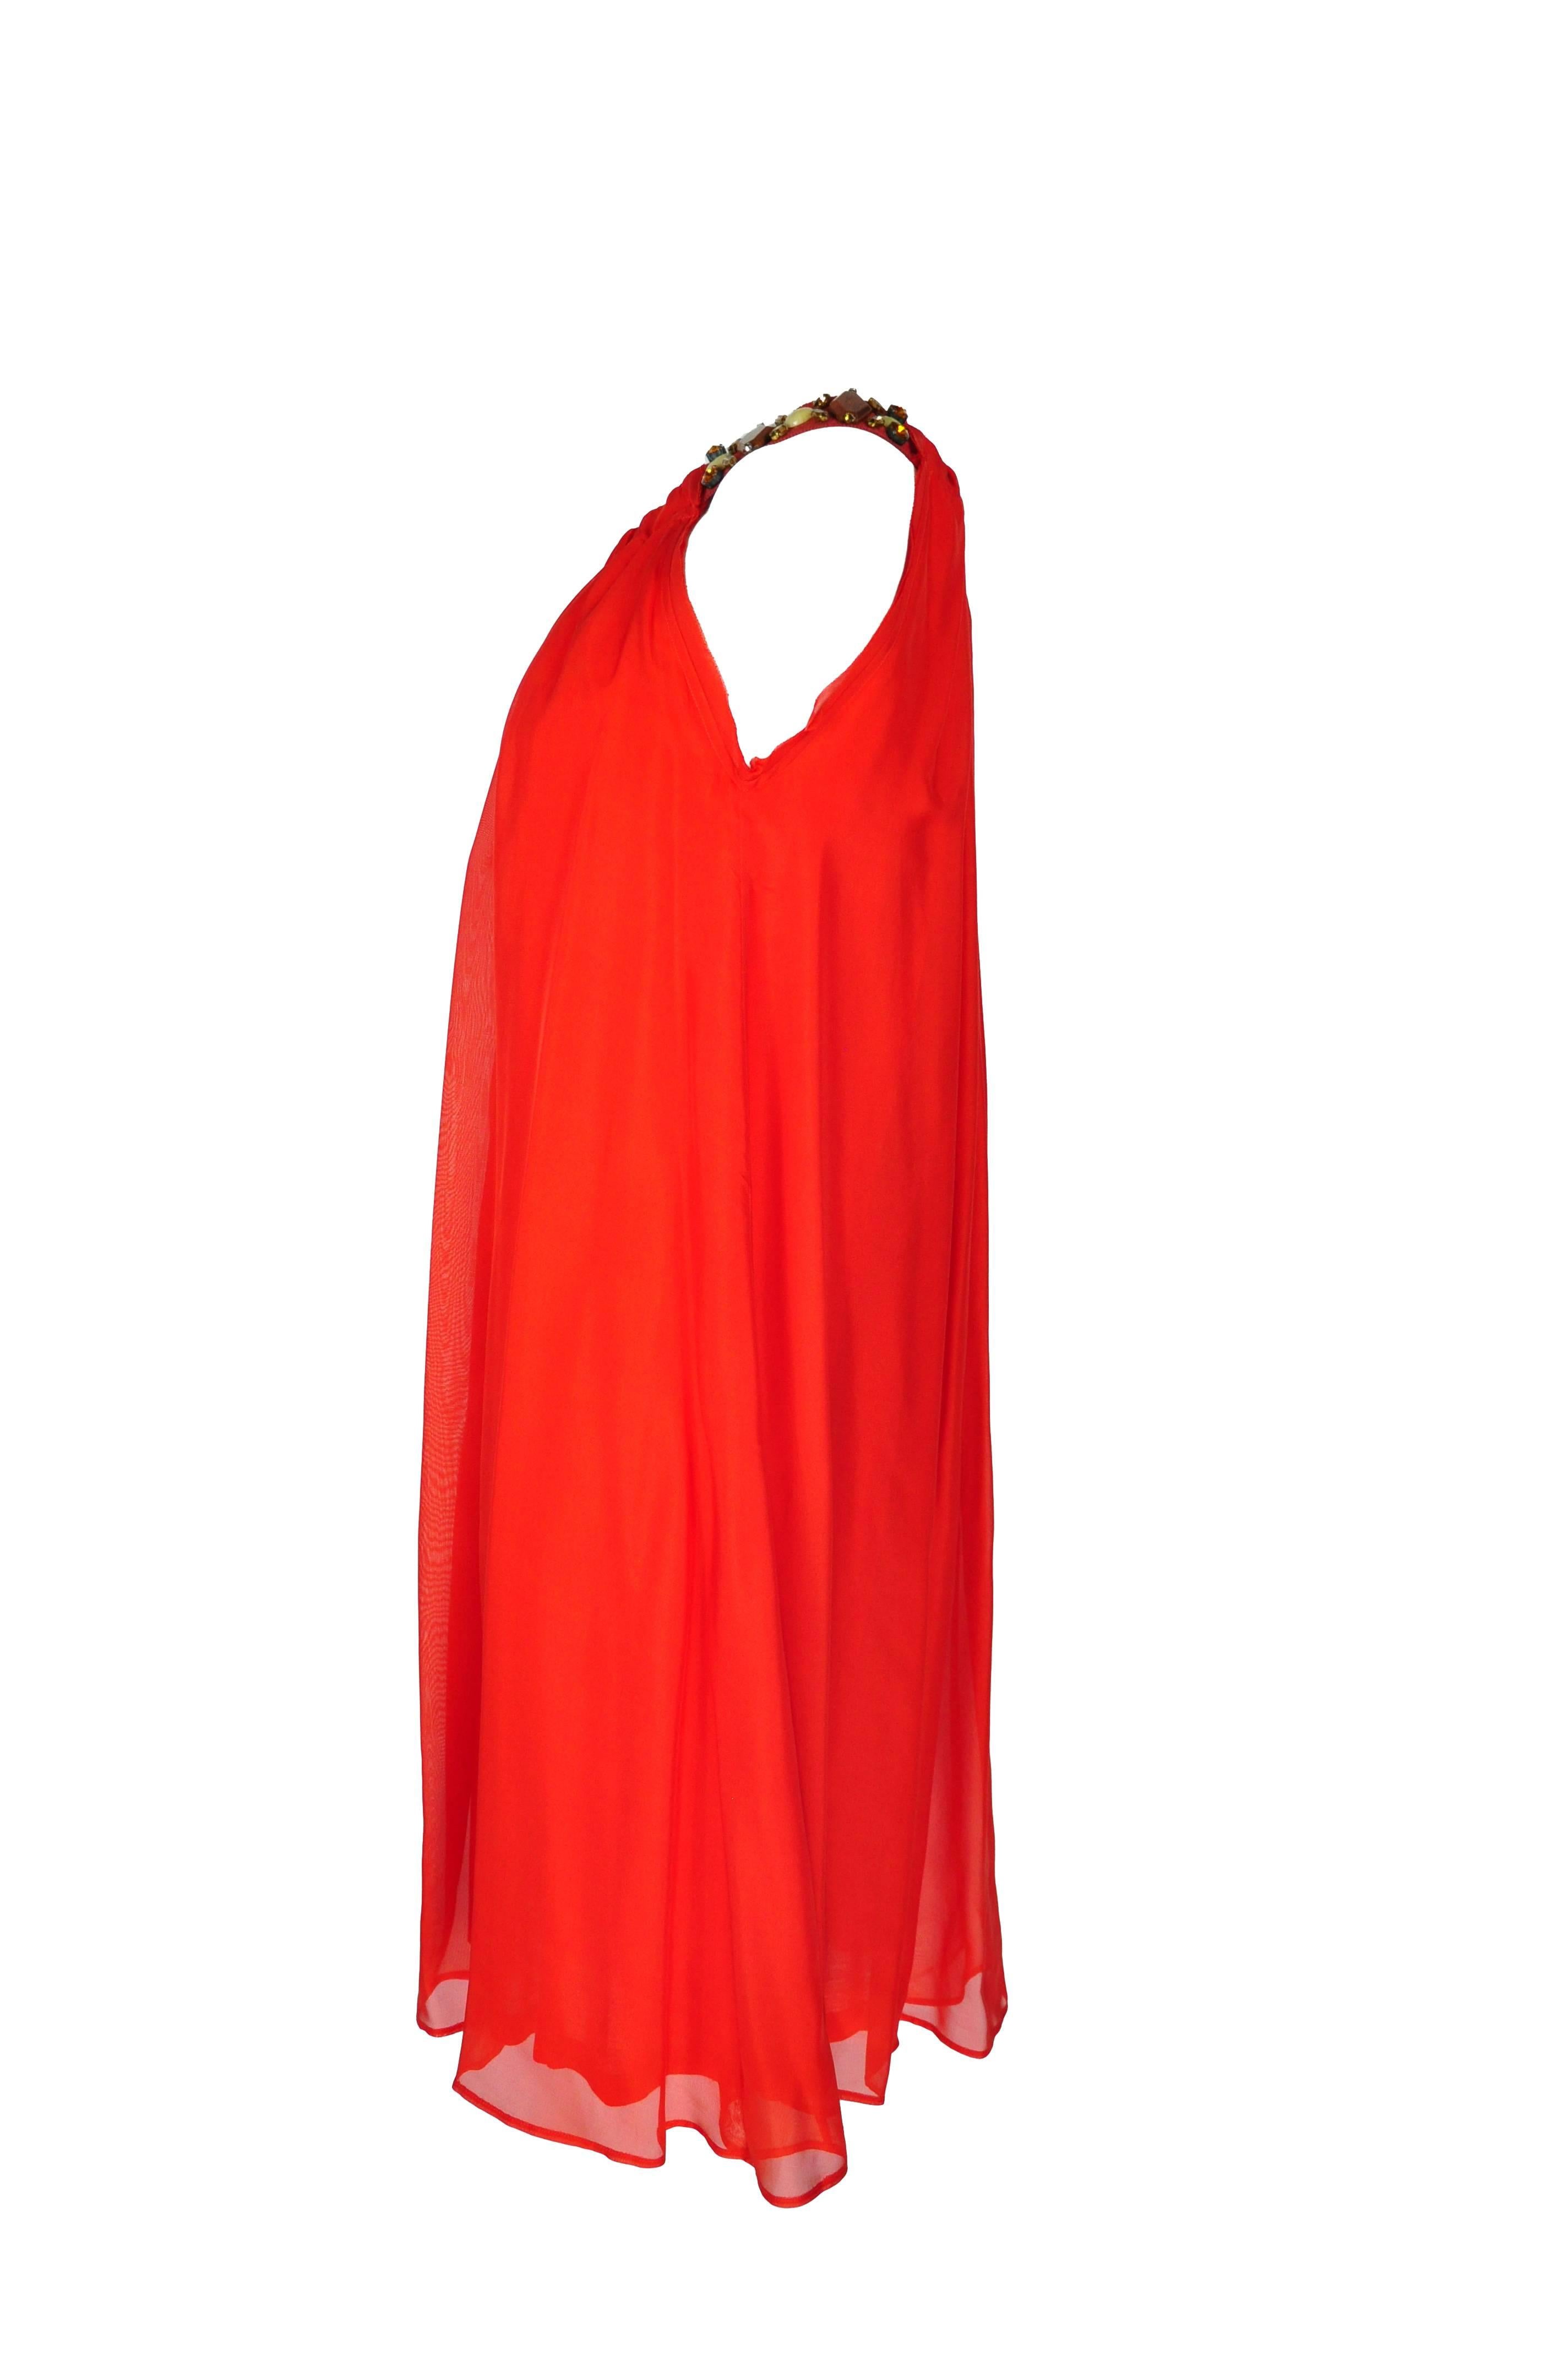 A slightly pleated and loose fit red halter neck silk dress from Lanvin, it features with the embellished grosgrain shoulder straps. Midi length and fully lined. Size is small.
